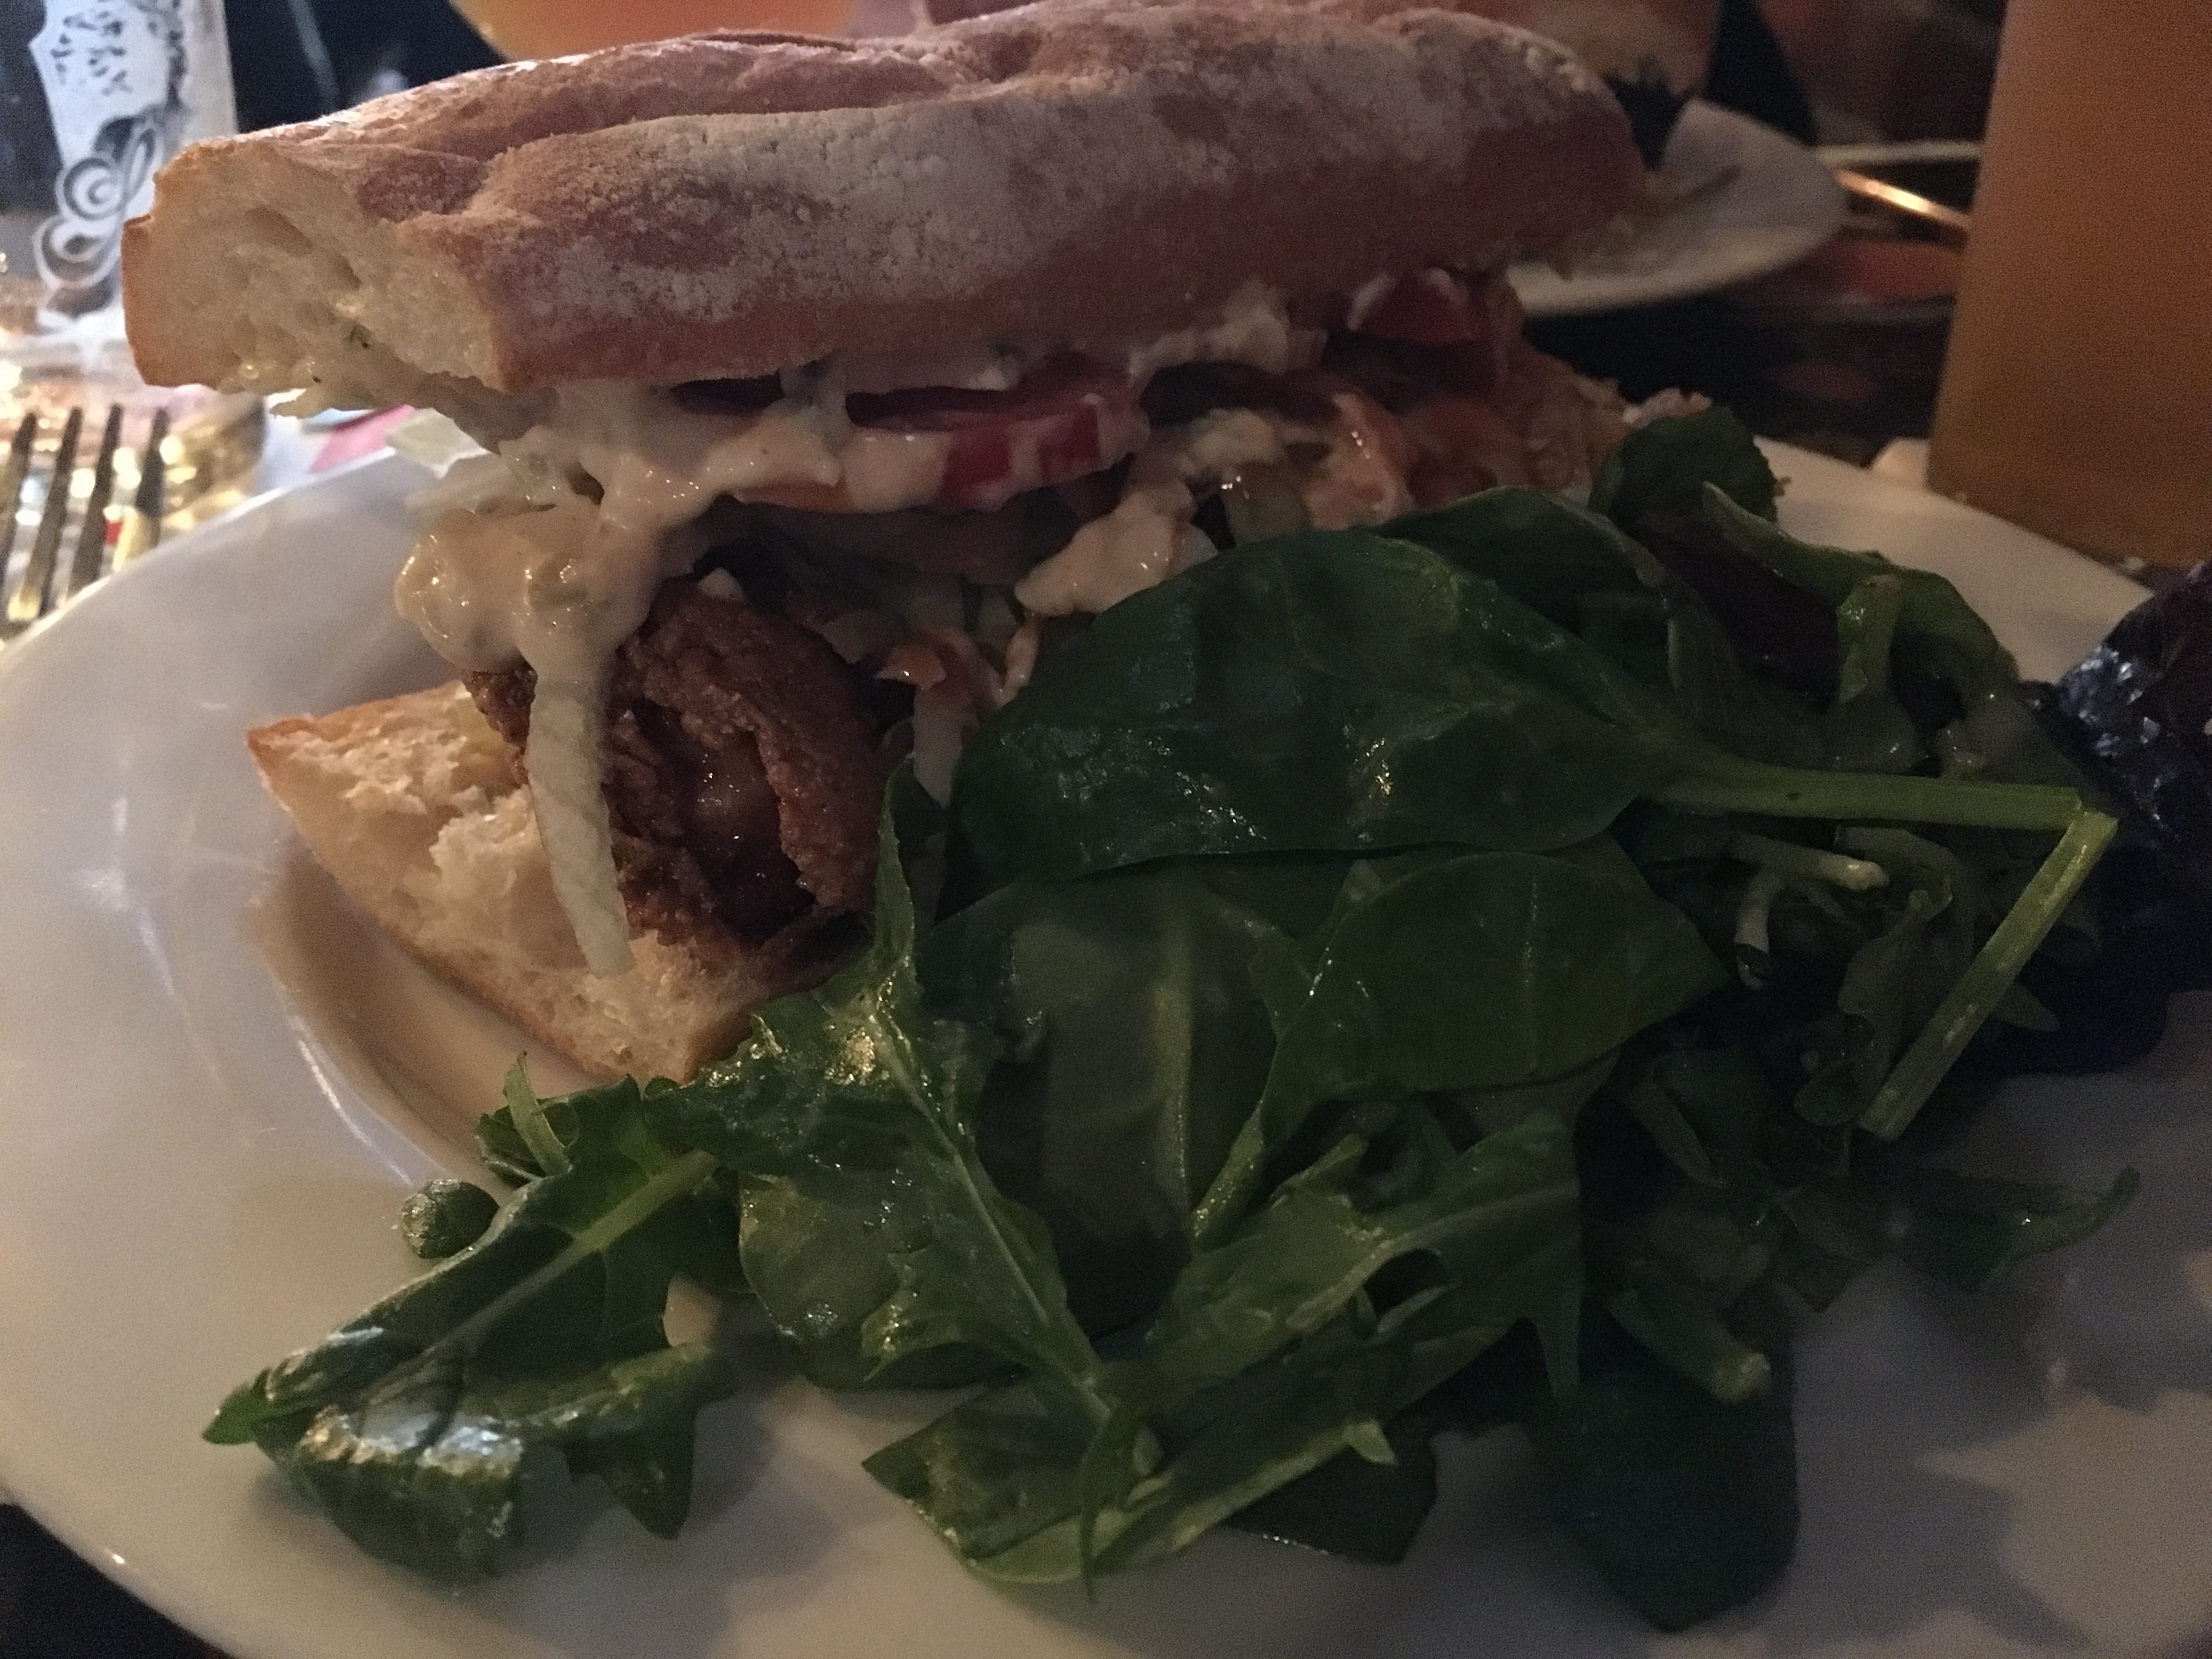 Saraveza now offers a Fried Oyster Po Boy served with a side salad on its new menu.